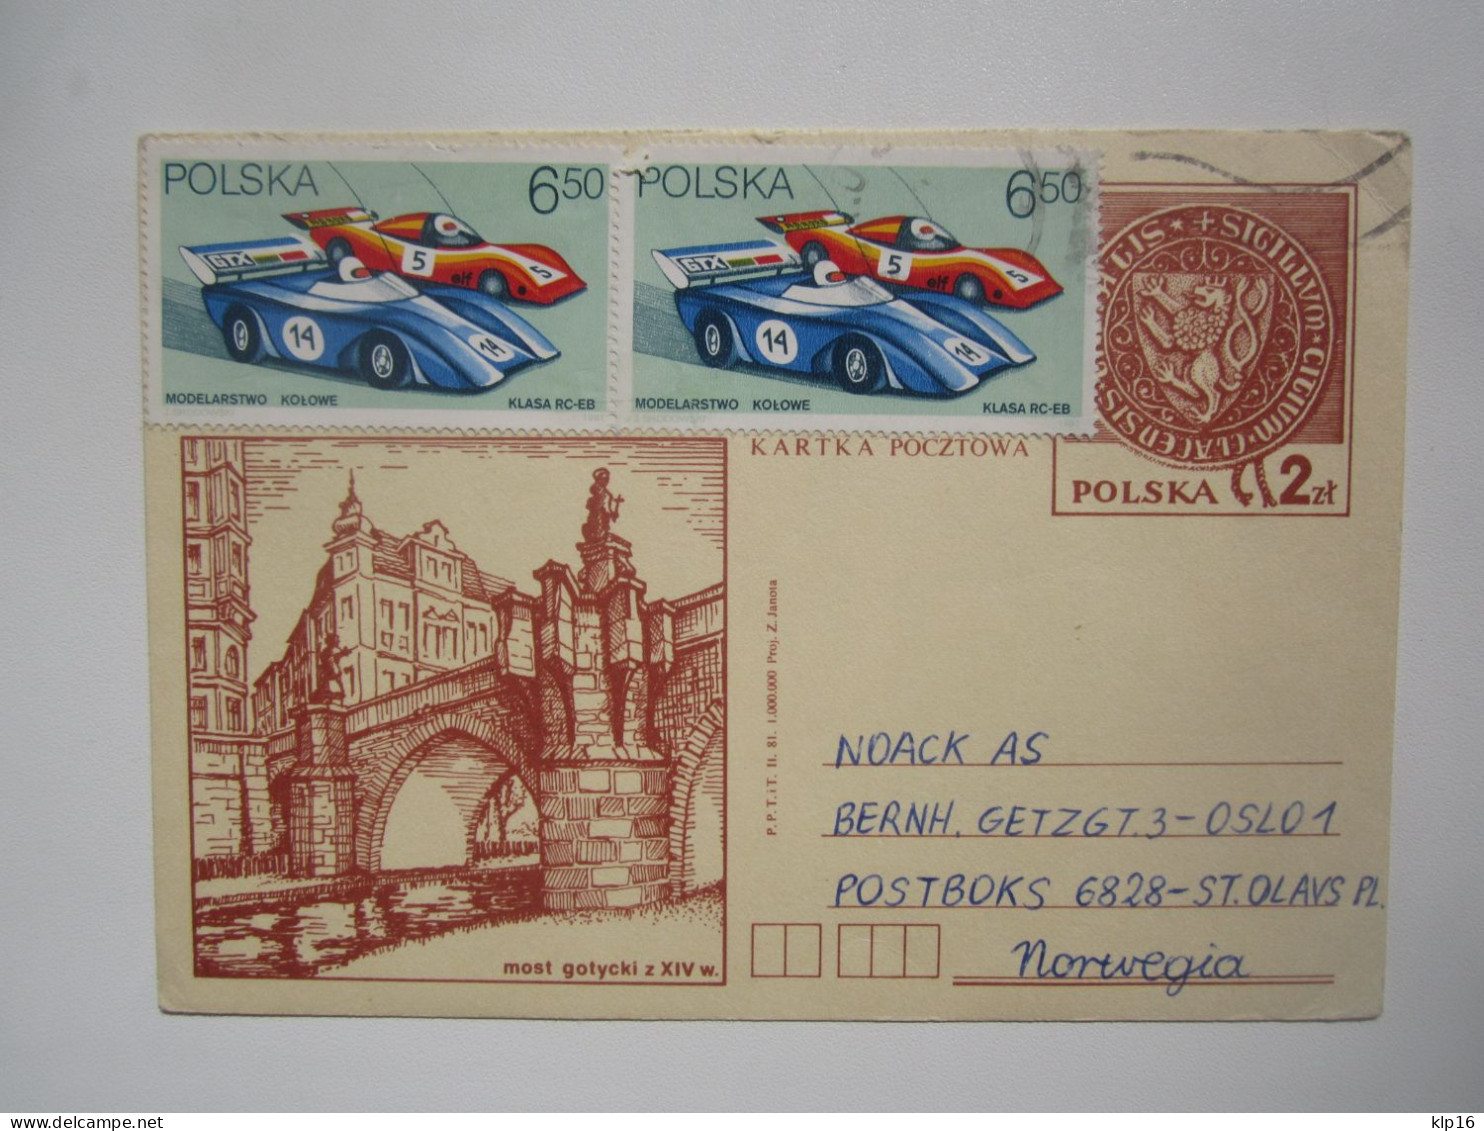 POLAND POSTAL CARD To NORWAY - Lettres & Documents